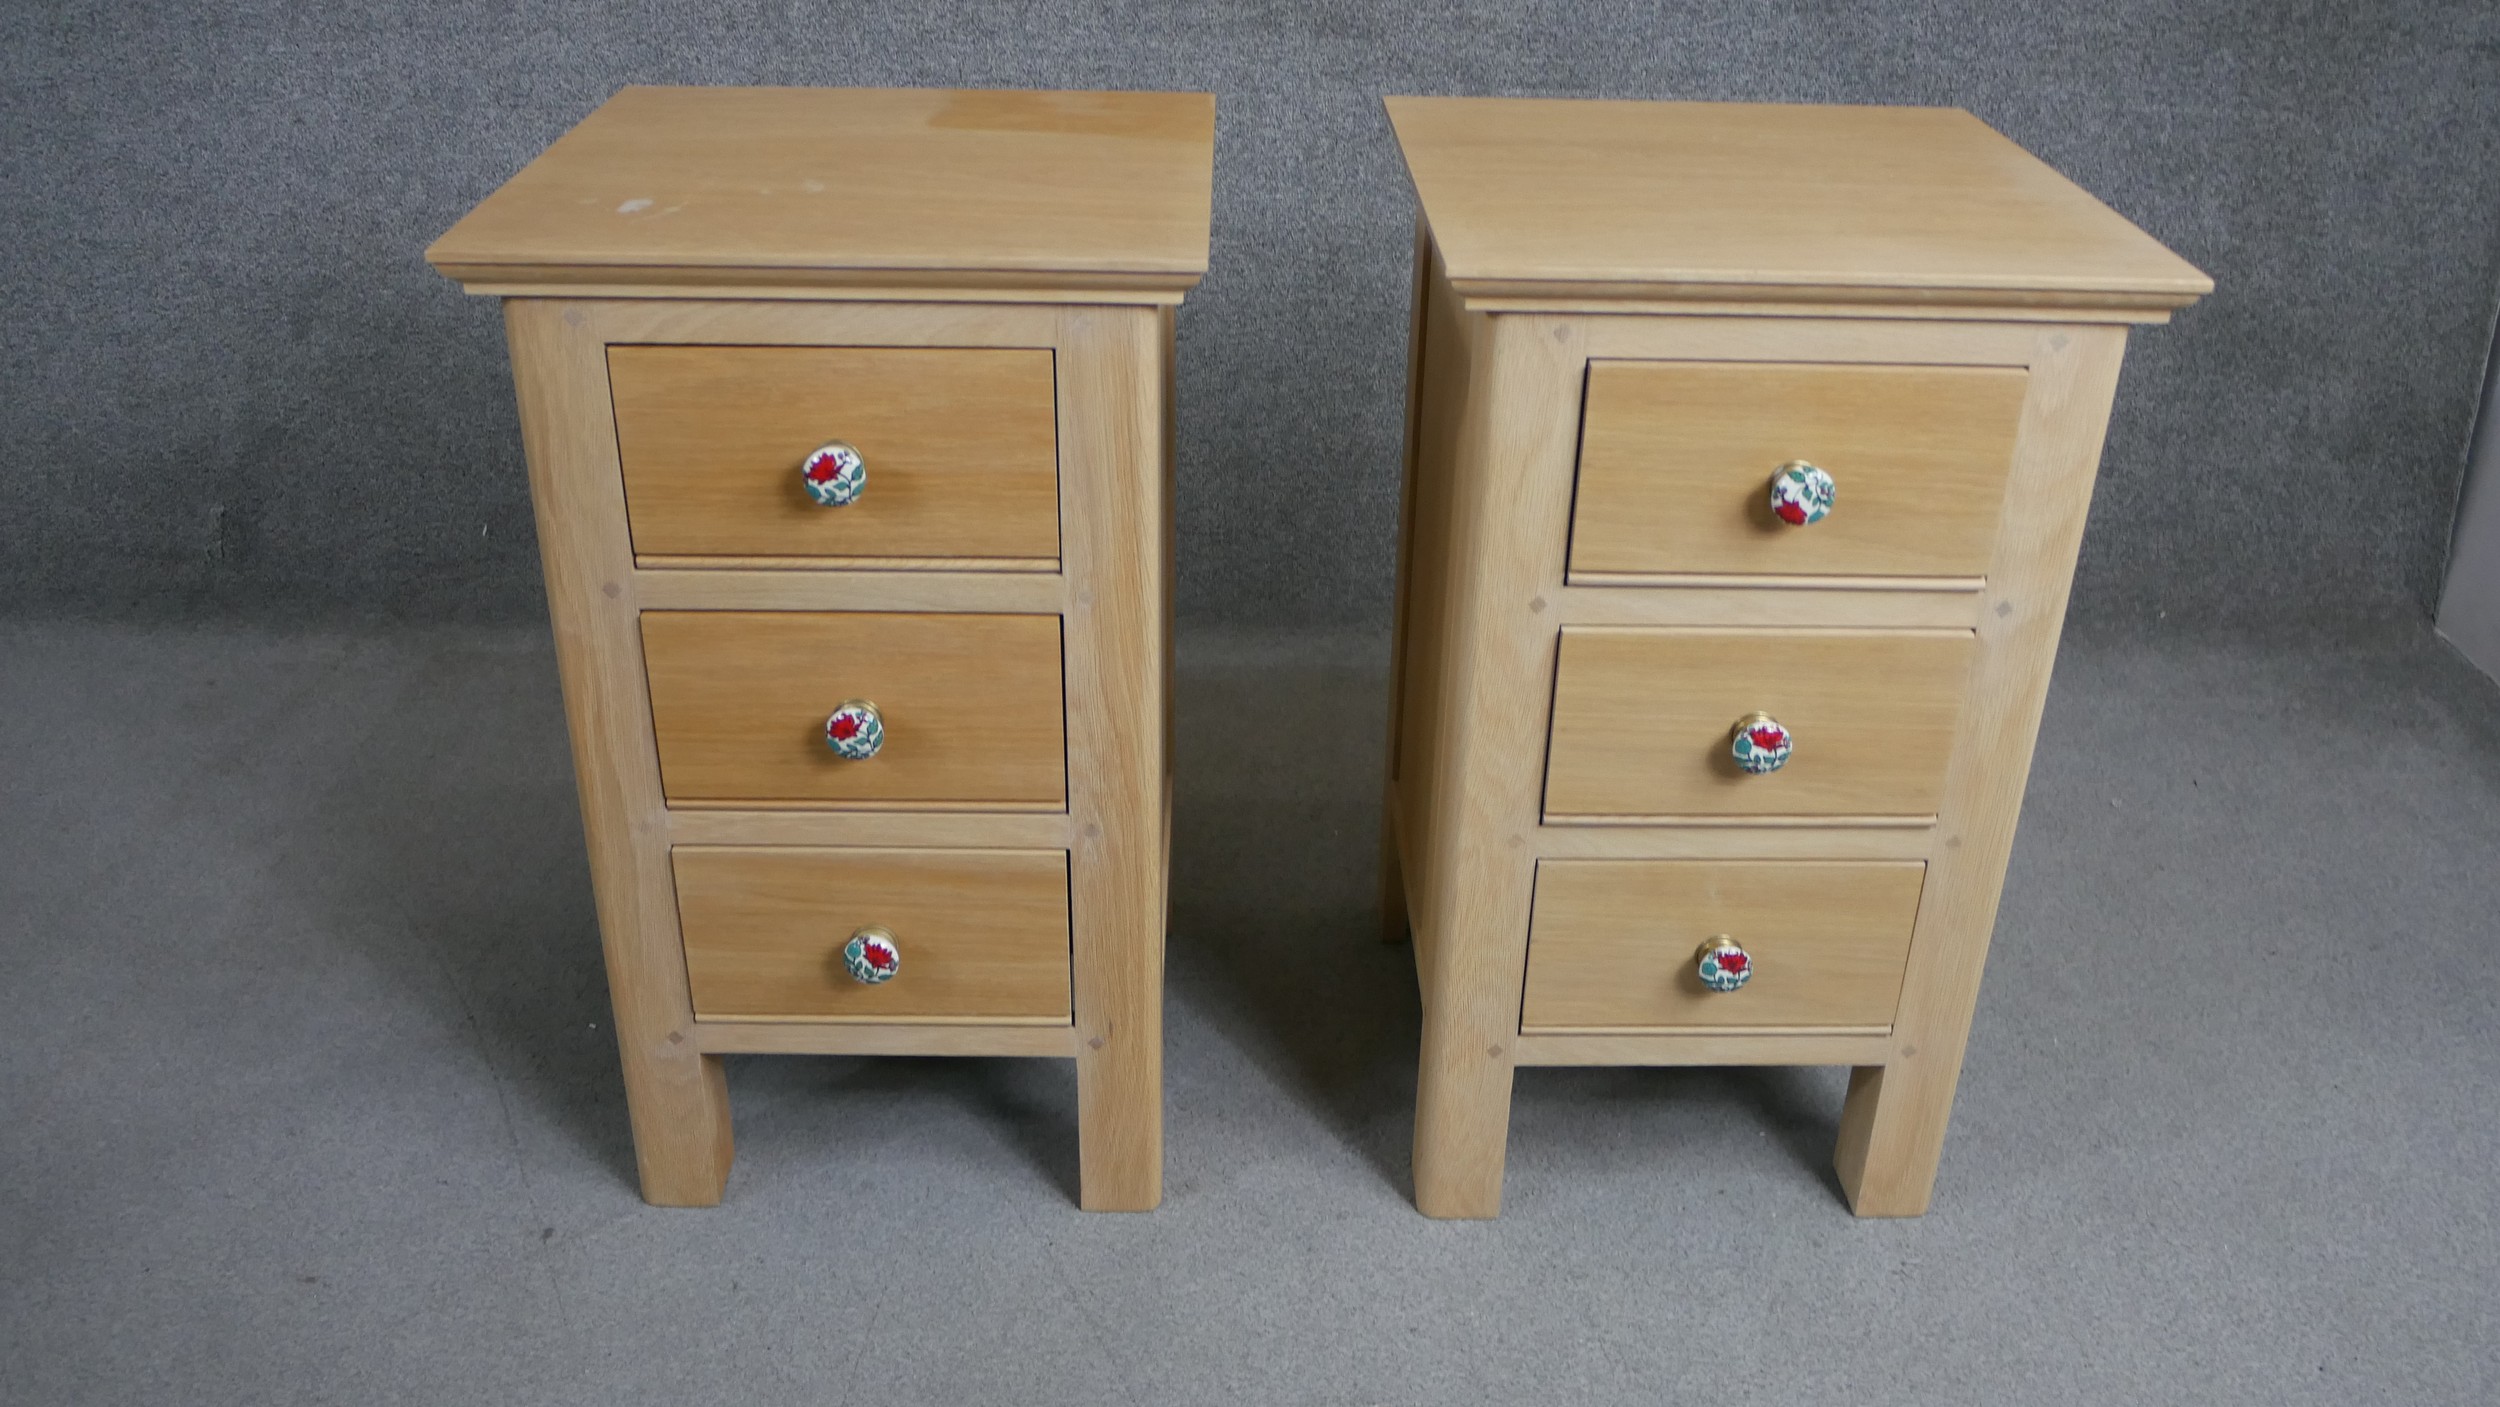 A pair of contemporary oak bedside chests each with three drawers and painted floral handles. H.73